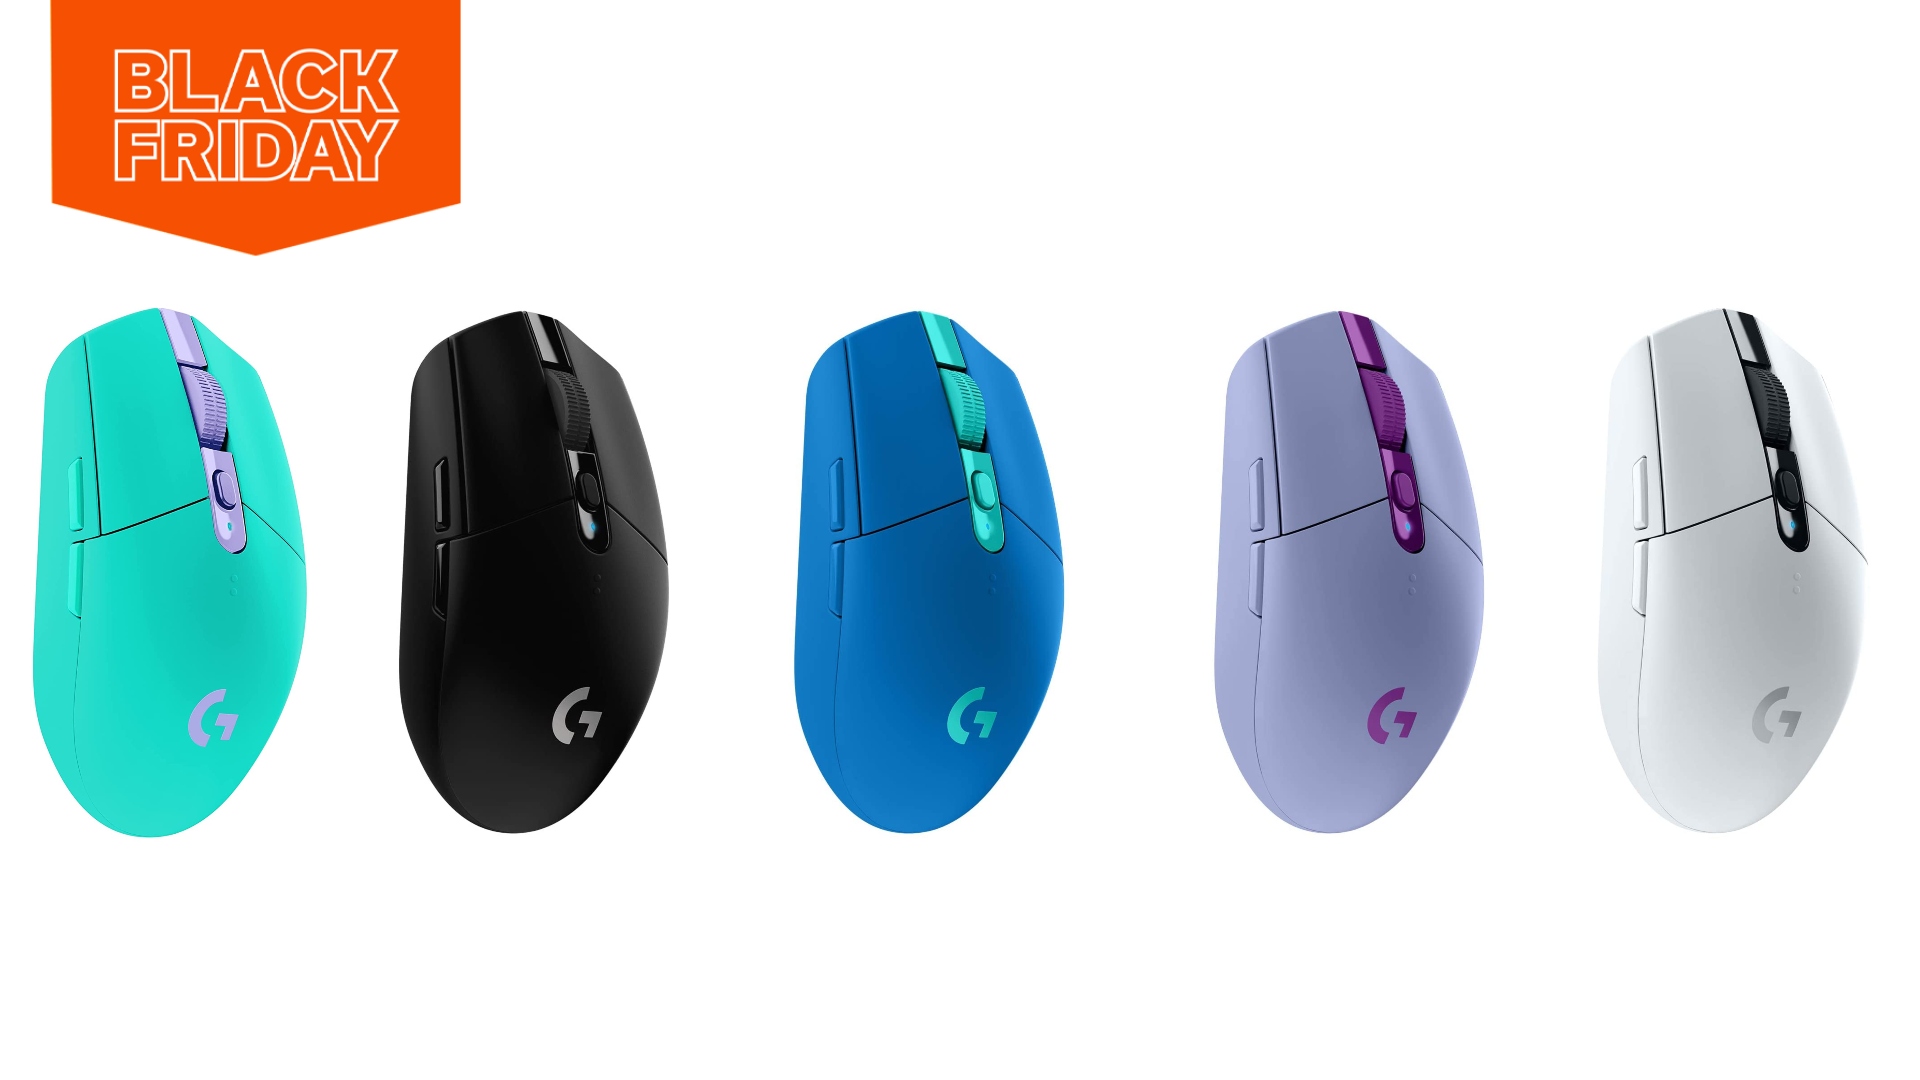 Take control with a Logitech wireless gaming mouse at 40% off this Cyber Monday